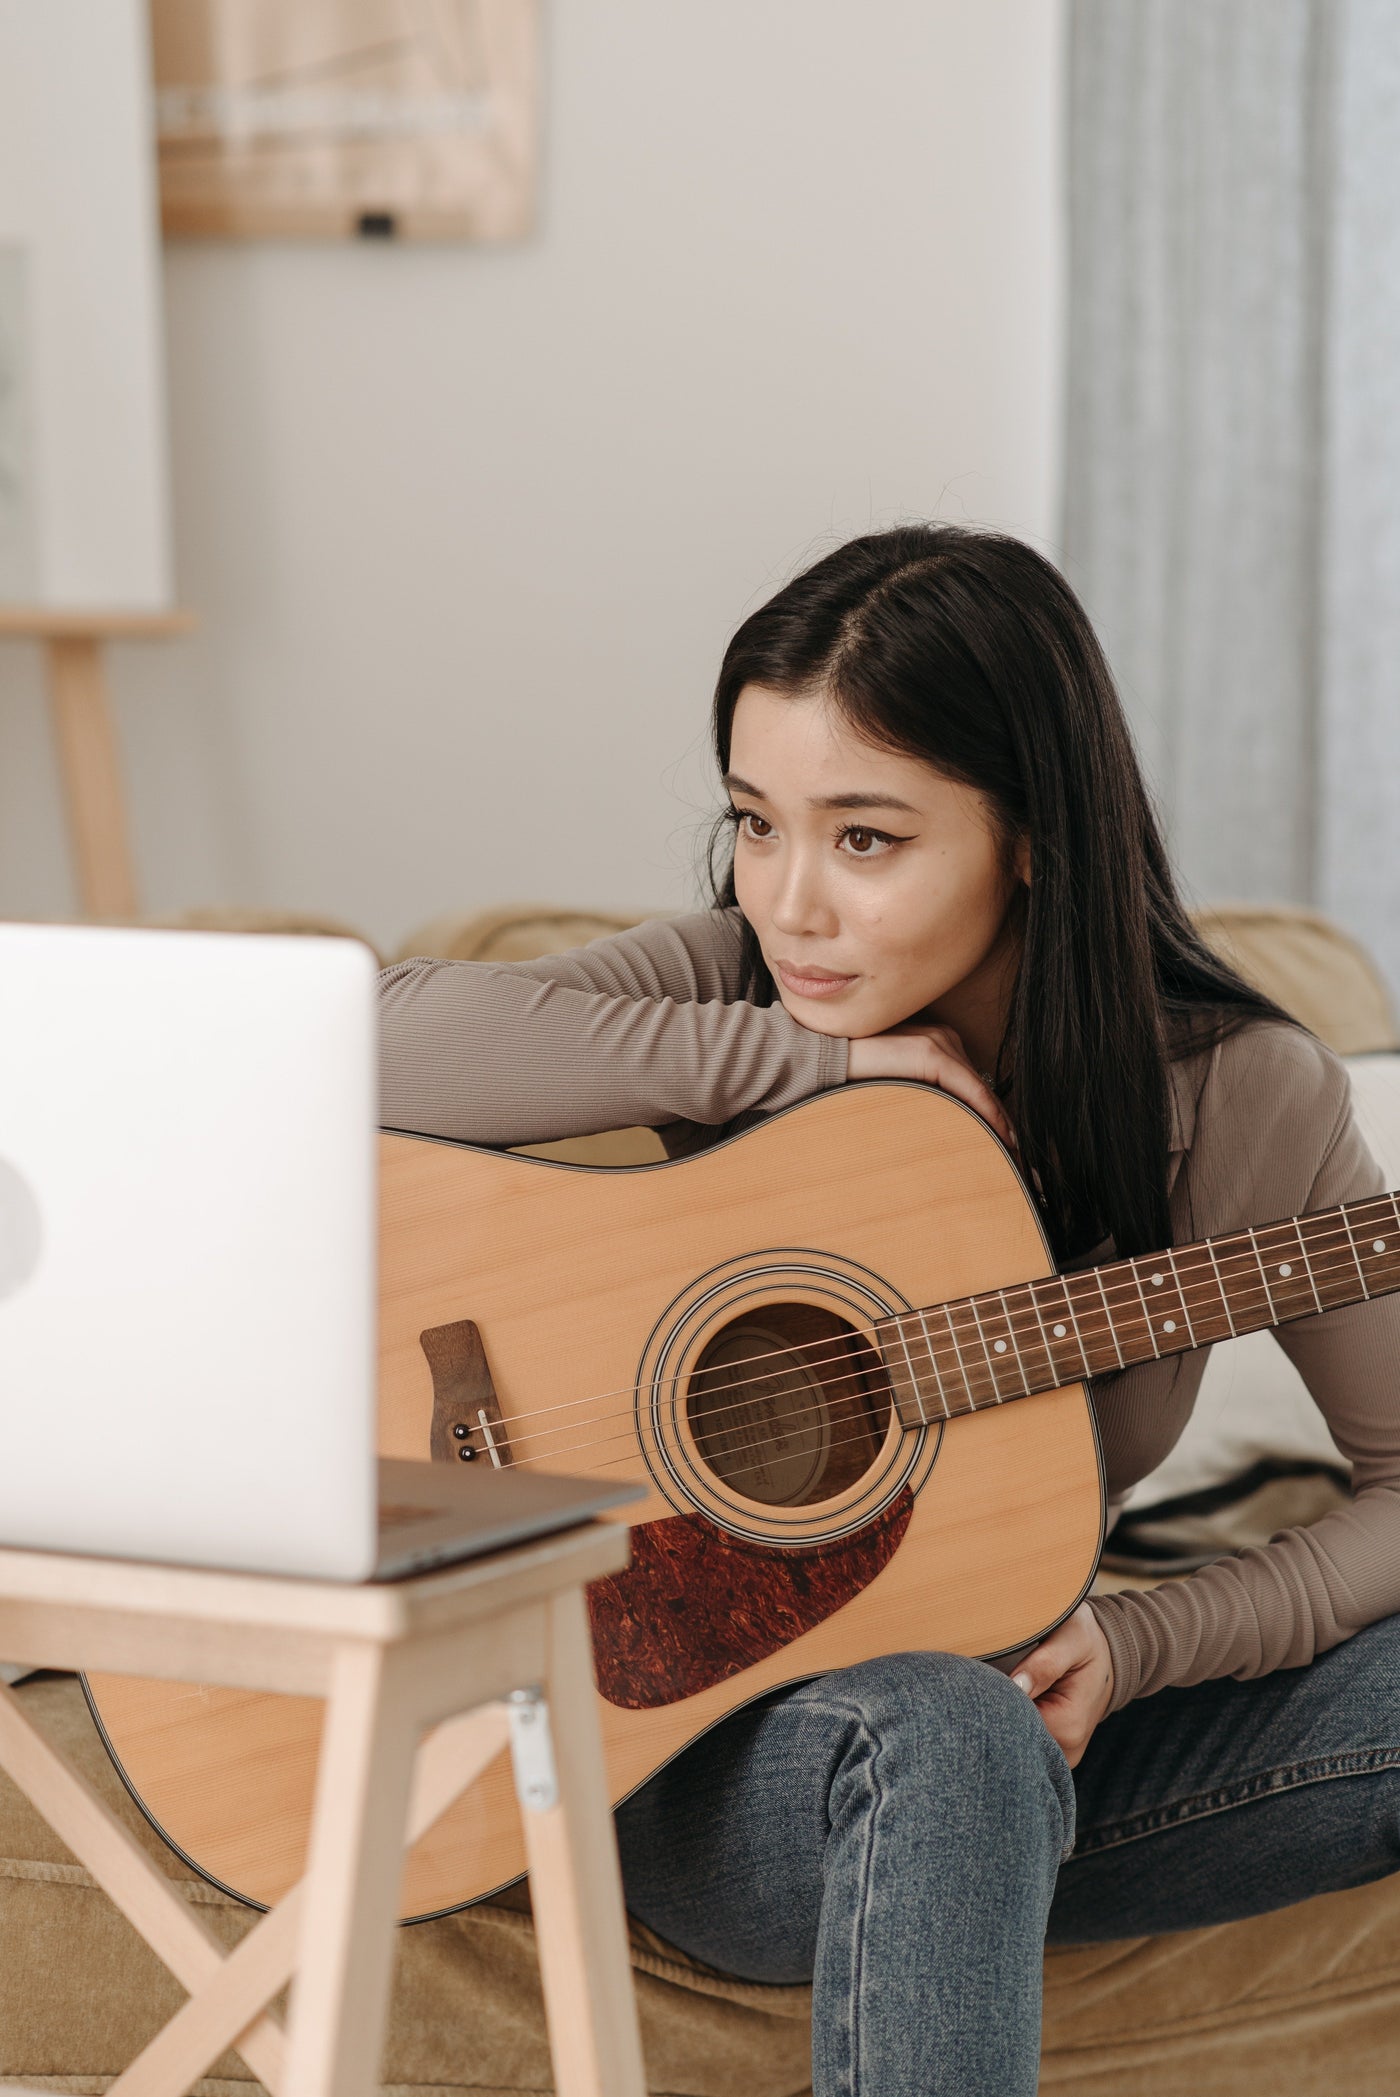 The young asian women holding the guitar and wathing on the laptop